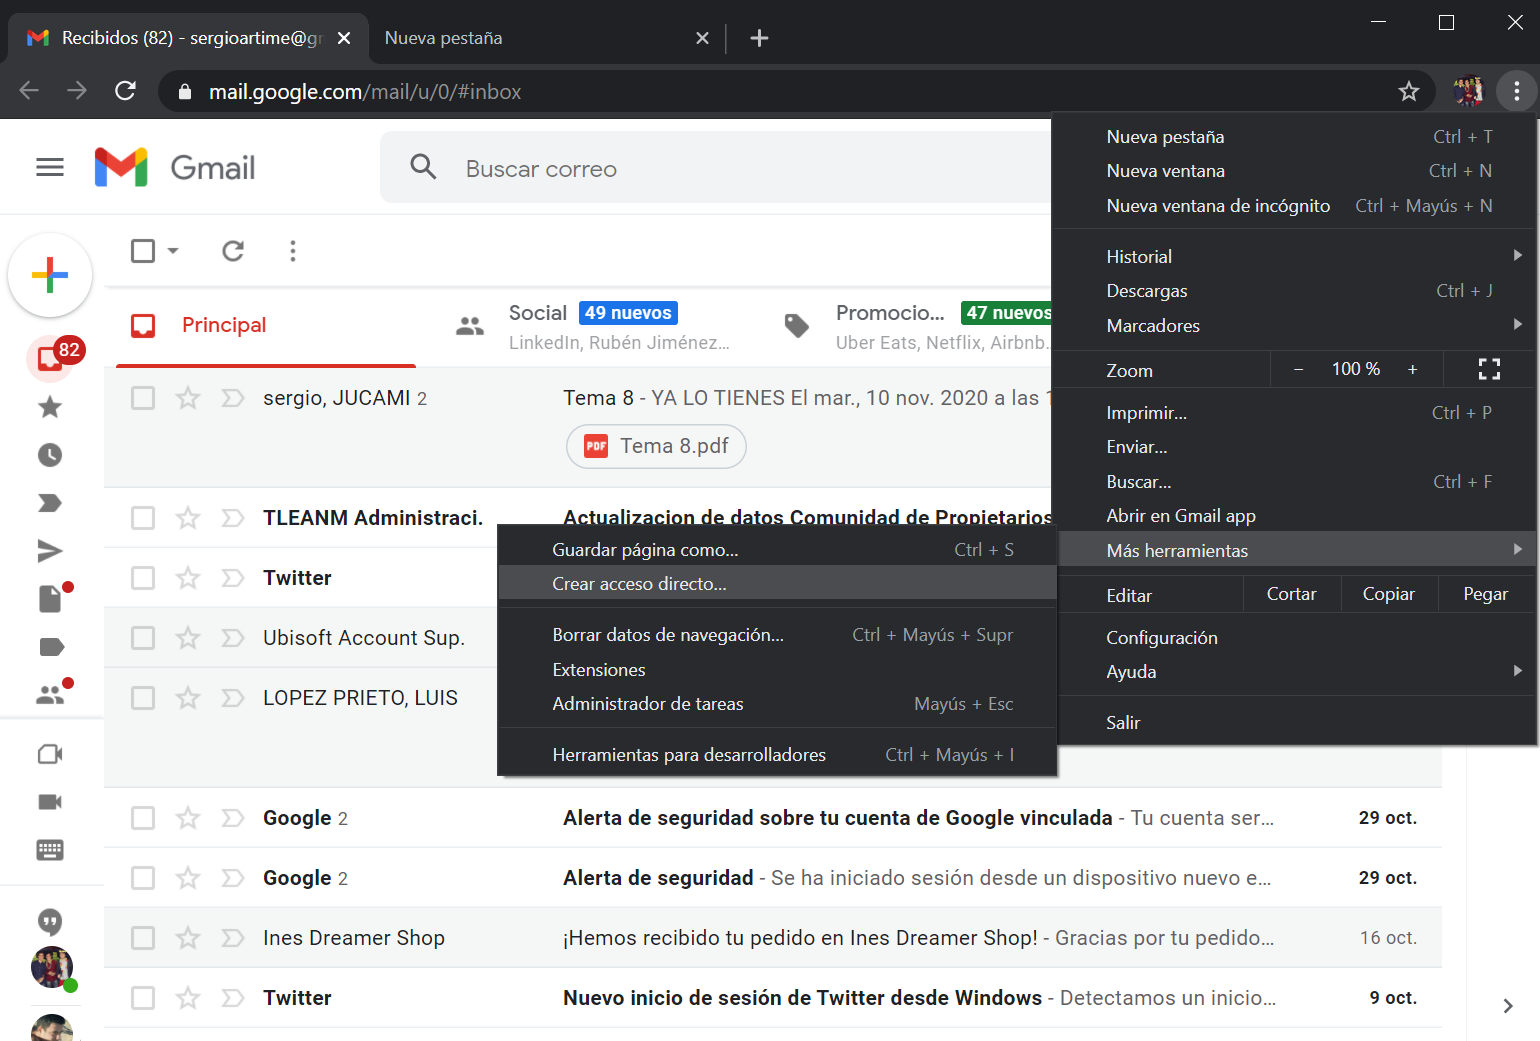 gmail app for windows 10 download